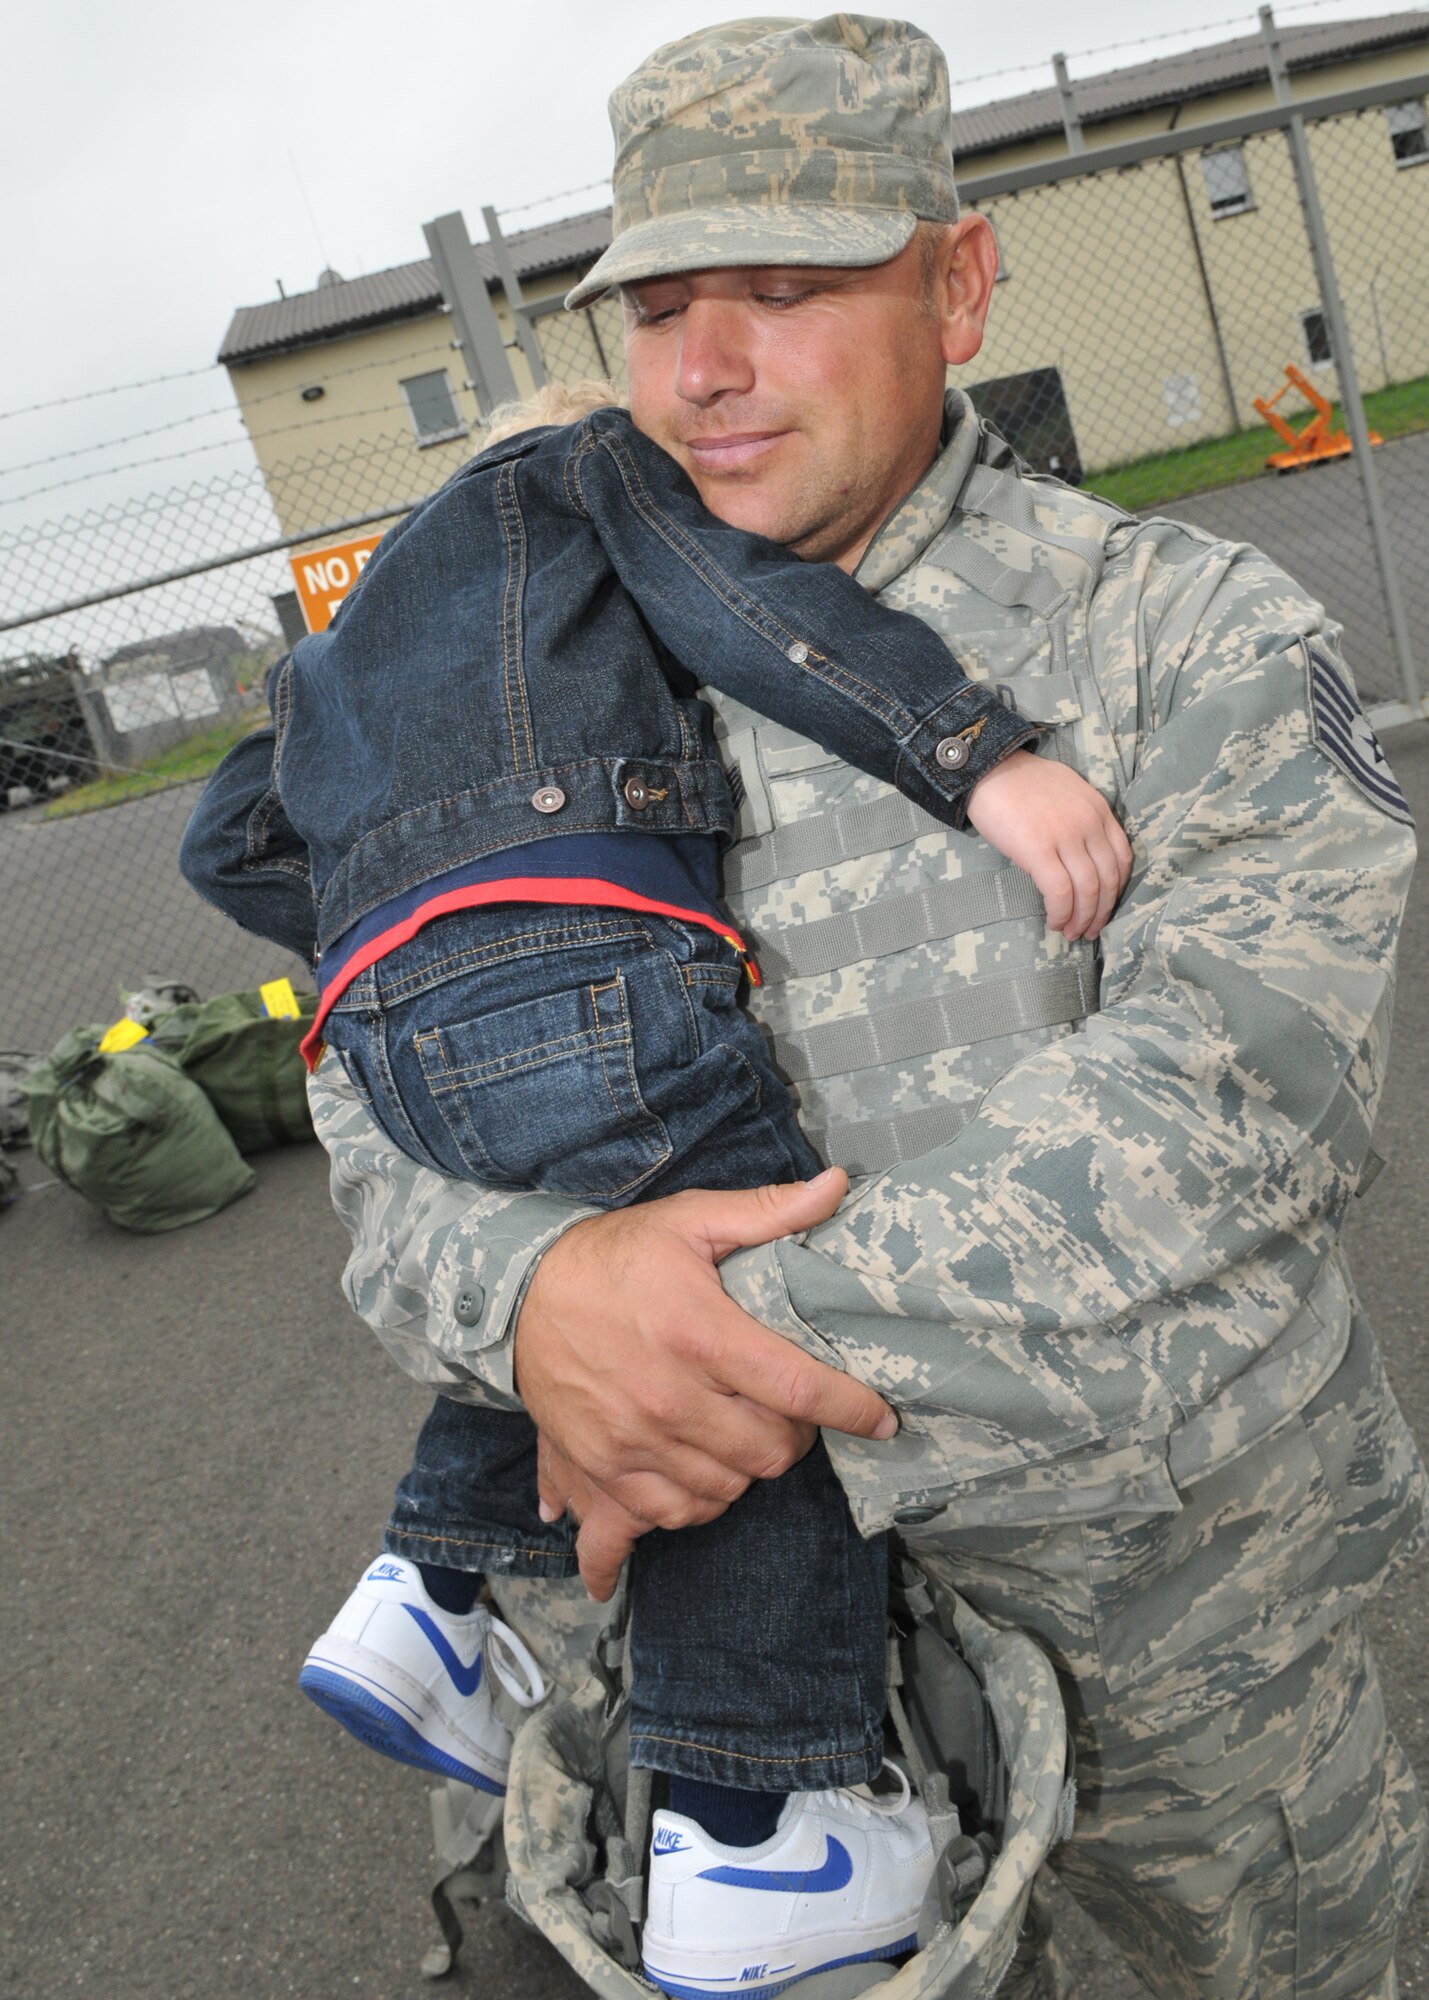 SPANGDAHLEM AIR BASE, Germany – Tech. Sgt. Thomas Crutchfield, 606th Air Control Squadron, hugs his son Landon after returning from a four-month deployment to Kandahar, Afghanistan, Sept. 16.  About 60 members of the 606th ACS operated radar and communication for command and control for the 71st Expeditionary Air Control Squadron.  The unit also deployed 300 short tons of equipment to support air battle management operations and more than 13,000 sorties.  Approximately 30 other 606th ACS members also returned from a four-month deployment to southwest Asia in support of the 73rd EACS.  (U.S. Air Force photo/Airman 1st Class Nick Wilson)